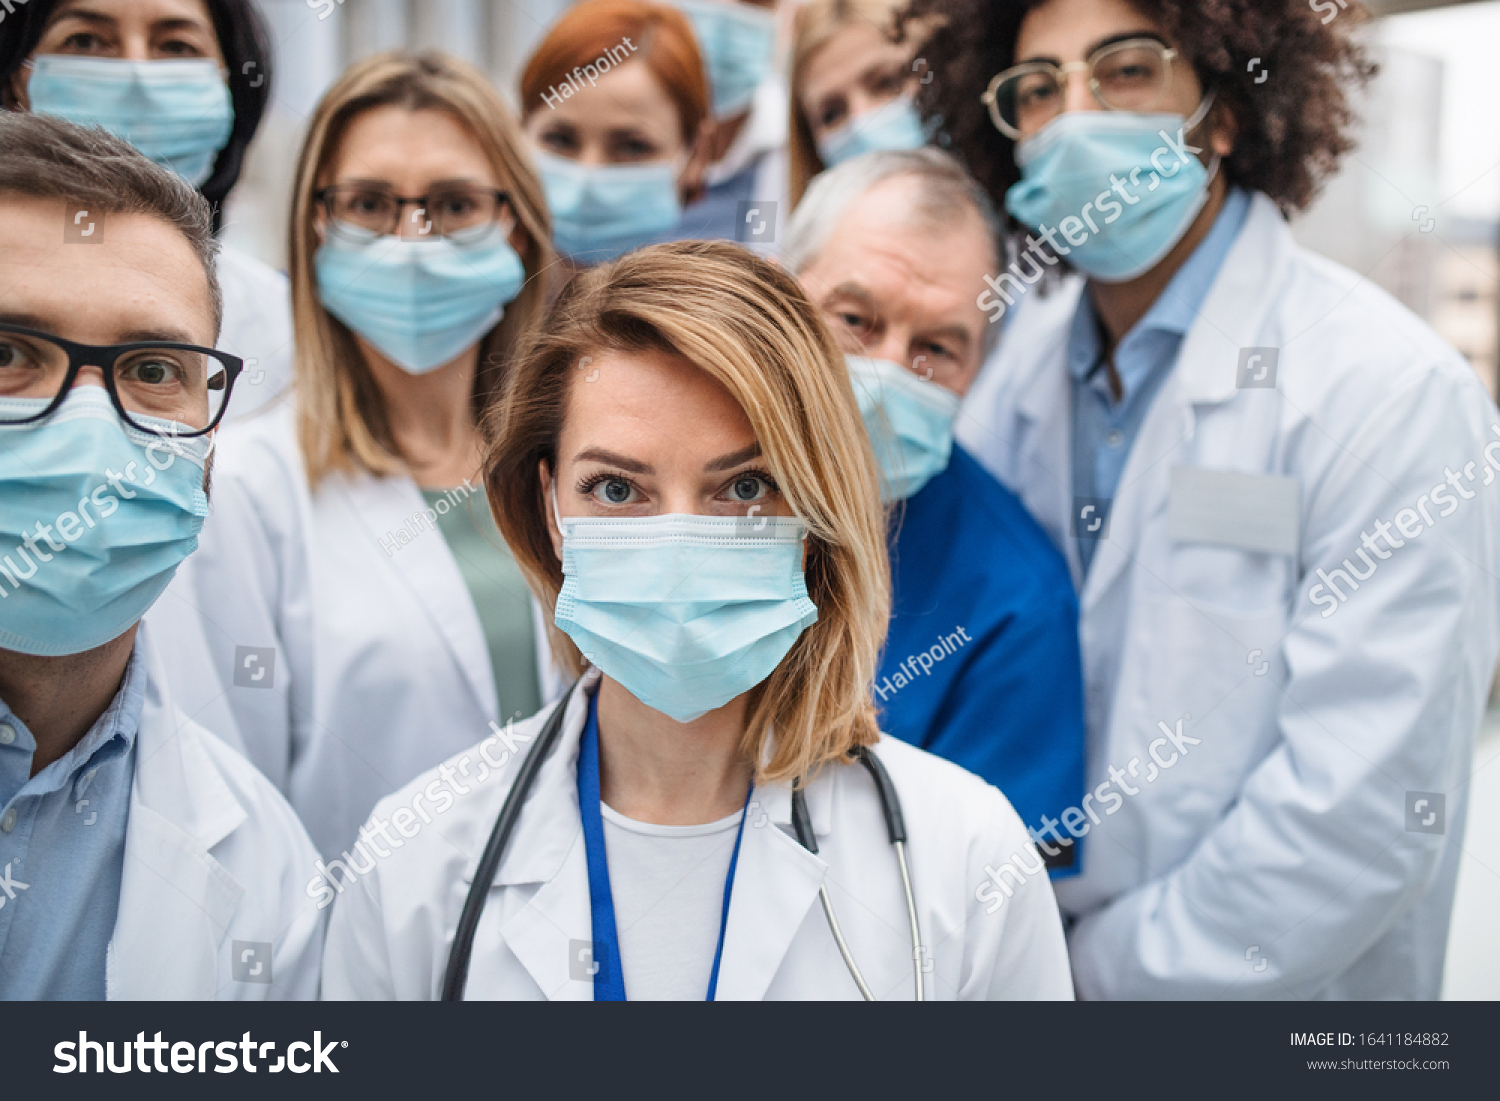 Group of doctors with face masks looking at camera, corona virus concept. #1641184882